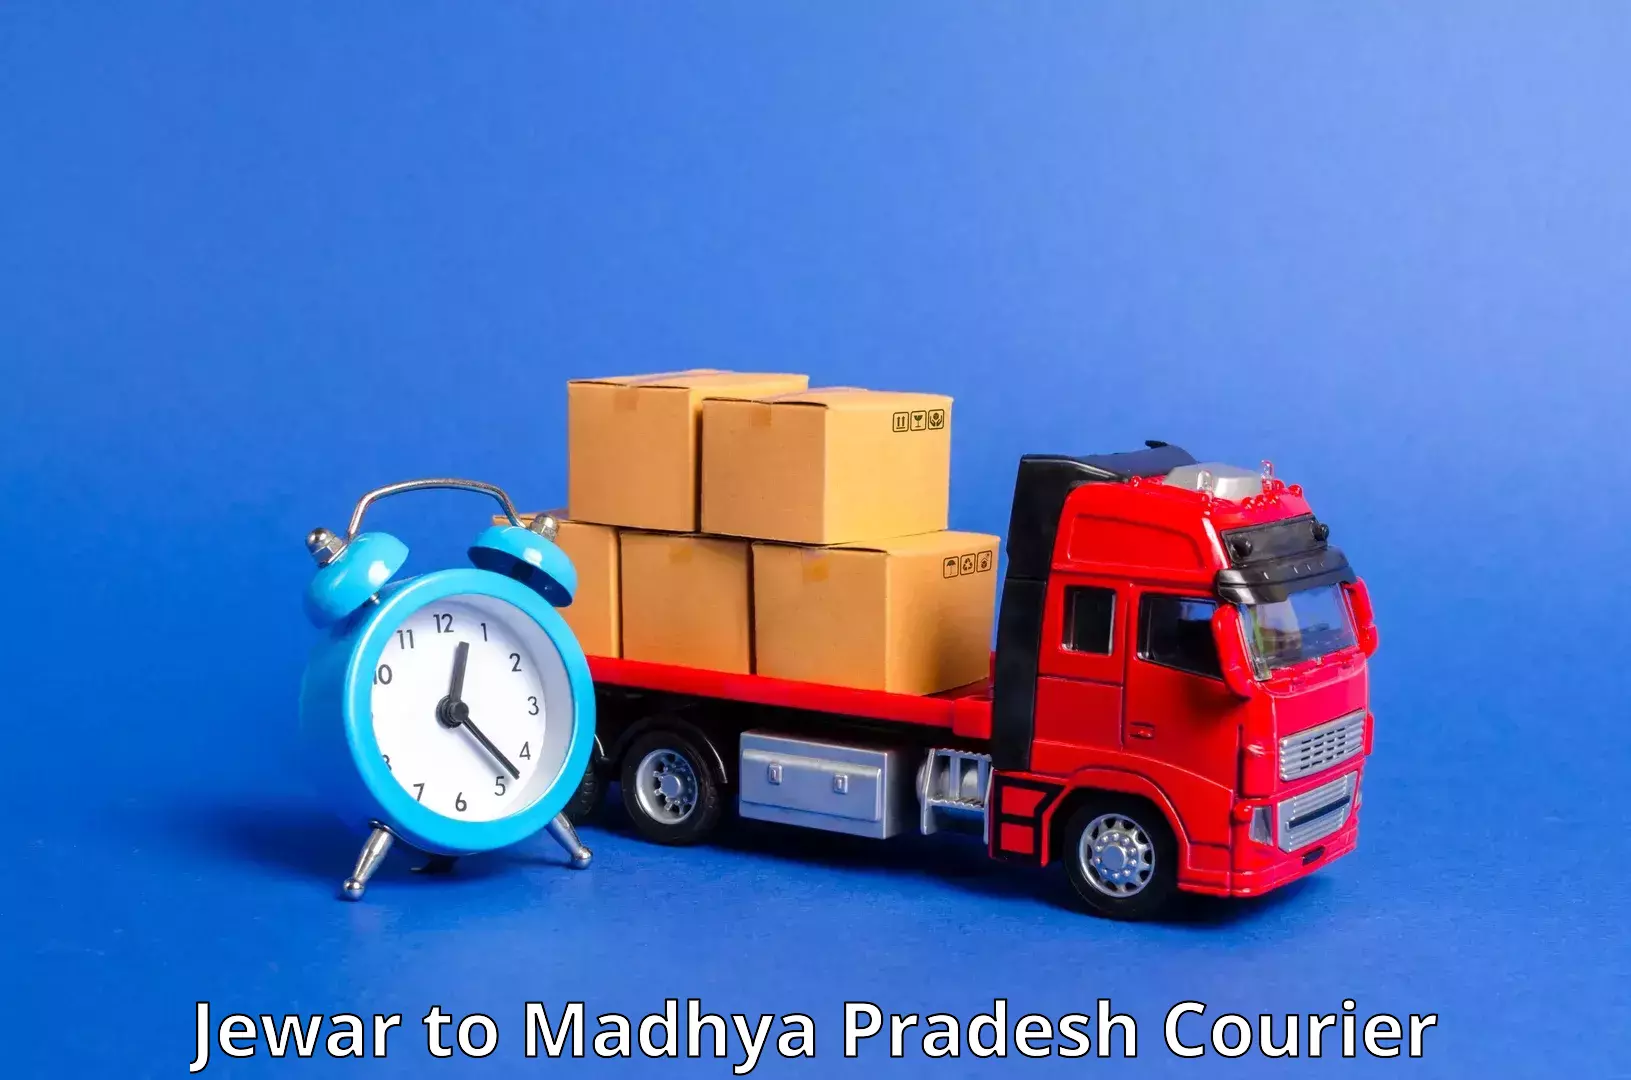 Sustainable shipping practices in Jewar to Madhya Pradesh